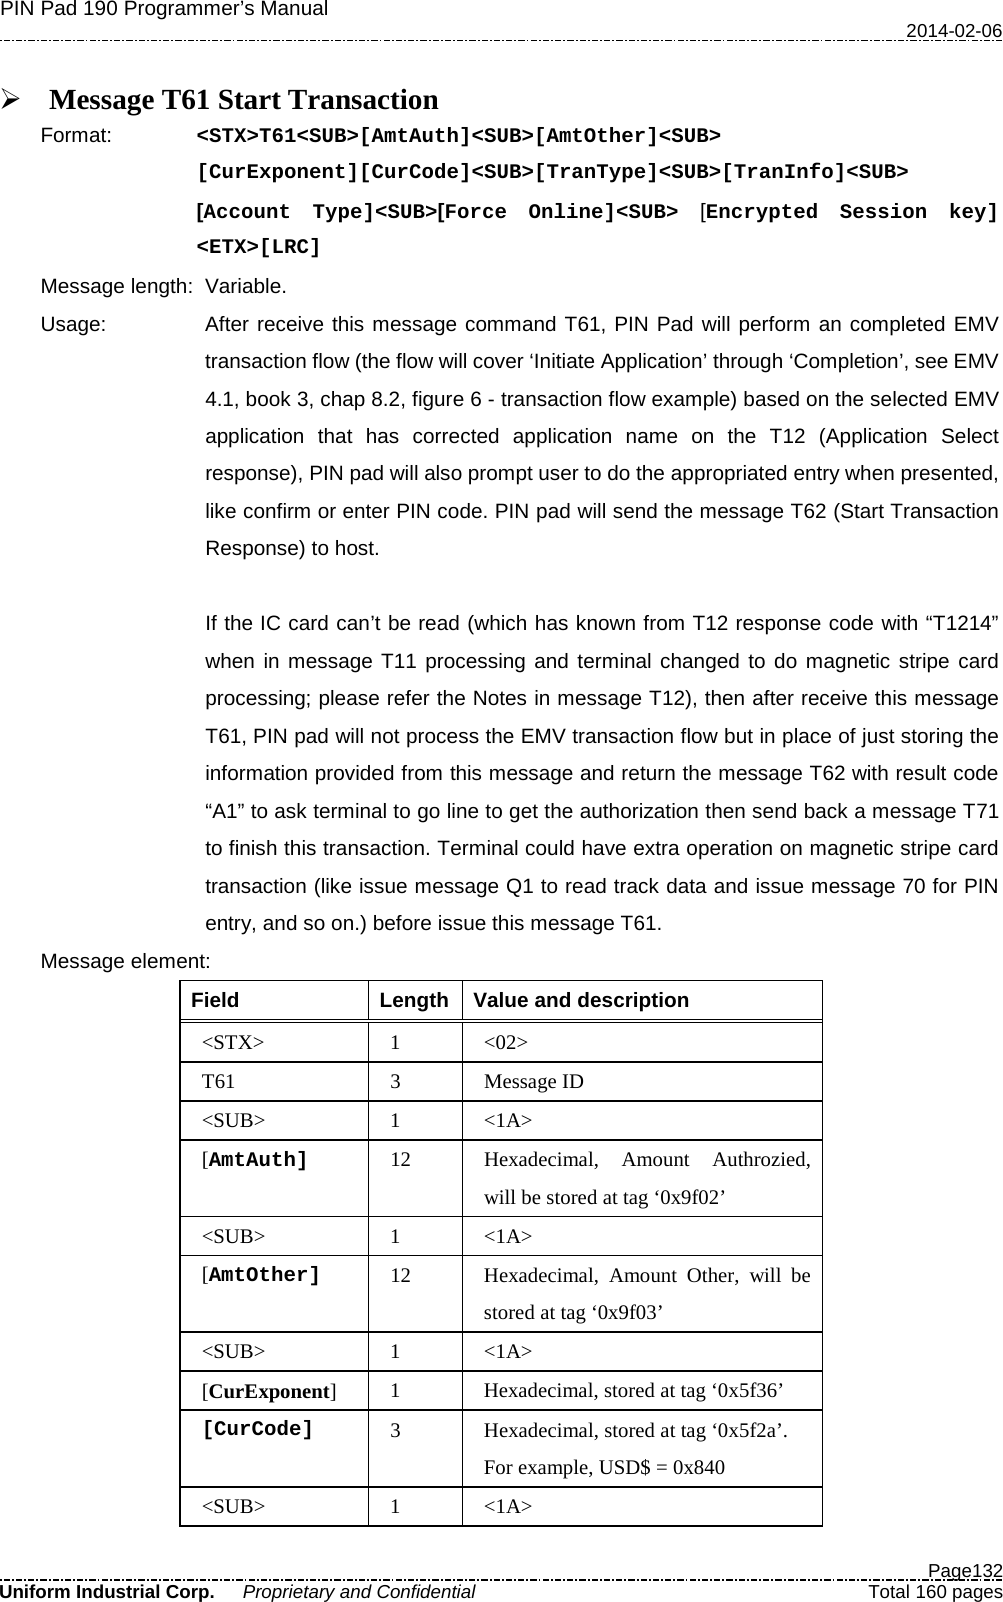 PIN Pad 190 Programmer’s Manual   2014-02-06  Page132 Uniform Industrial Corp. Proprietary and Confidential  Total 160 pages   Message T61 Start Transaction Format:   &lt;STX&gt;T61&lt;SUB&gt;[AmtAuth]&lt;SUB&gt;[AmtOther]&lt;SUB&gt; [CurExponent][CurCode]&lt;SUB&gt;[TranType]&lt;SUB&gt;[TranInfo]&lt;SUB&gt; [Account Type]&lt;SUB&gt;[Force Online]&lt;SUB&gt; [Encrypted Session key]  &lt;ETX&gt;[LRC] Message length: Variable.   Usage: After receive this message command T61, PIN Pad will perform an completed EMV transaction flow (the flow will cover ‘Initiate Application’ through ‘Completion’, see EMV 4.1, book 3, chap 8.2, figure 6 - transaction flow example) based on the selected EMV application that has corrected application name on the T12 (Application Select response), PIN pad will also prompt user to do the appropriated entry when presented, like confirm or enter PIN code. PIN pad will send the message T62 (Start Transaction Response) to host.    If the IC card can’t be read (which has known from T12 response code with “T1214” when in message T11 processing and terminal changed to do magnetic stripe card processing; please refer the Notes in message T12), then after receive this message T61, PIN pad will not process the EMV transaction flow but in place of just storing the information provided from this message and return the message T62 with result code “A1” to ask terminal to go line to get the authorization then send back a message T71 to finish this transaction. Terminal could have extra operation on magnetic stripe card transaction (like issue message Q1 to read track data and issue message 70 for PIN entry, and so on.) before issue this message T61. Message element:   Field  Length  Value and description &lt;STX&gt;  1  &lt;02&gt; T61  3  Message ID &lt;SUB&gt;  1  &lt;1A&gt; [AmtAuth] 12 Hexadecimal, Amount Authrozied, will be stored at tag ‘0x9f02’ &lt;SUB&gt;  1  &lt;1A&gt; [AmtOther] 12 Hexadecimal, Amount Other, will be stored at tag ‘0x9f03’ &lt;SUB&gt;  1  &lt;1A&gt; [CurExponent]  1  Hexadecimal, stored at tag ‘0x5f36’ [CurCode] 3  Hexadecimal, stored at tag ‘0x5f2a’.   For example, USD$ = 0x840 &lt;SUB&gt;  1  &lt;1A&gt; 